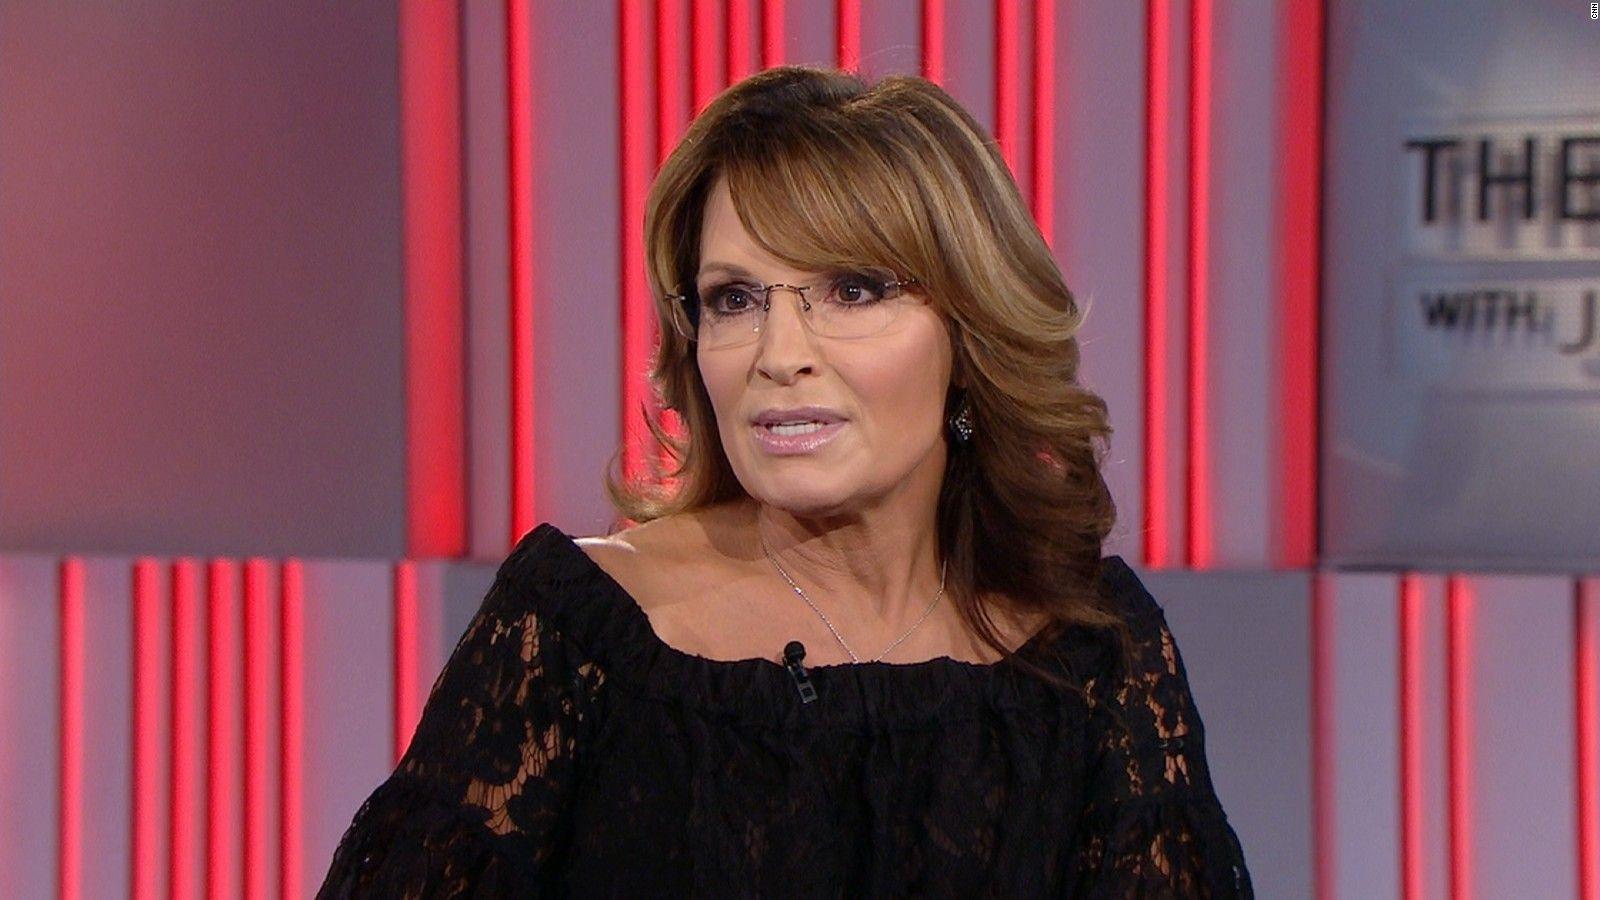 Sarah Palin reacts to Bill O'Reilly's exit from Fox News